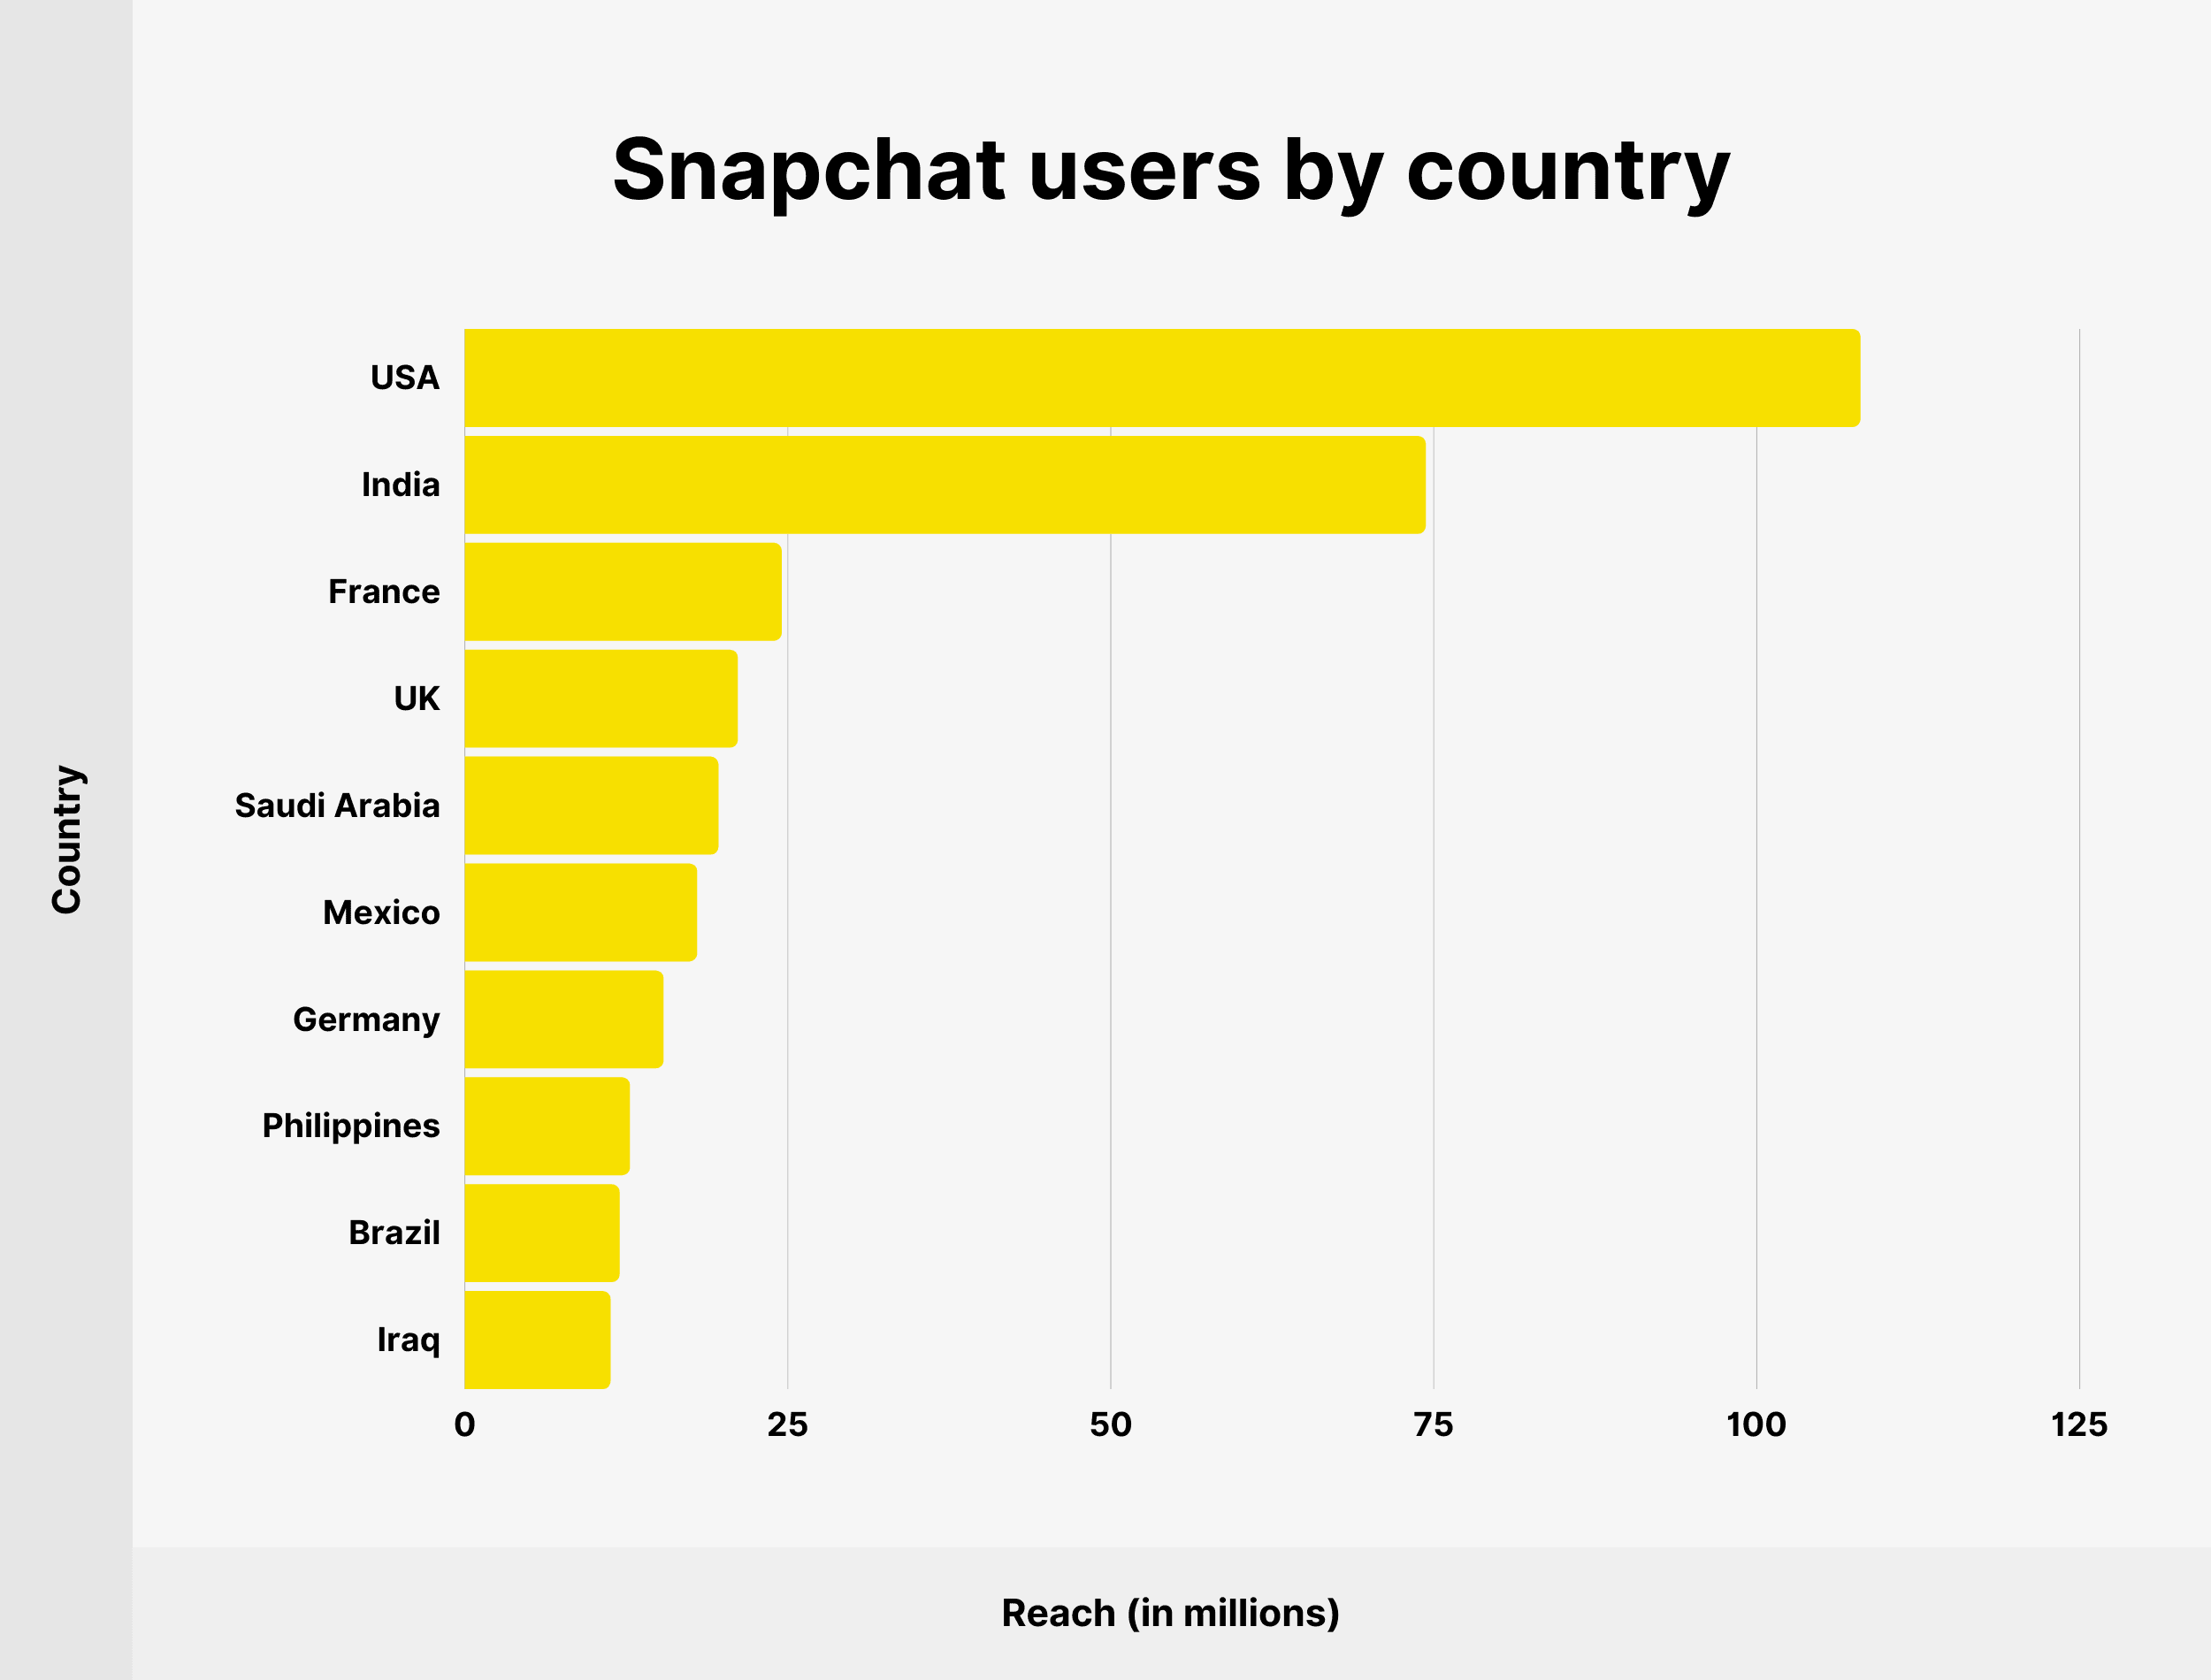 Snapchat users by country